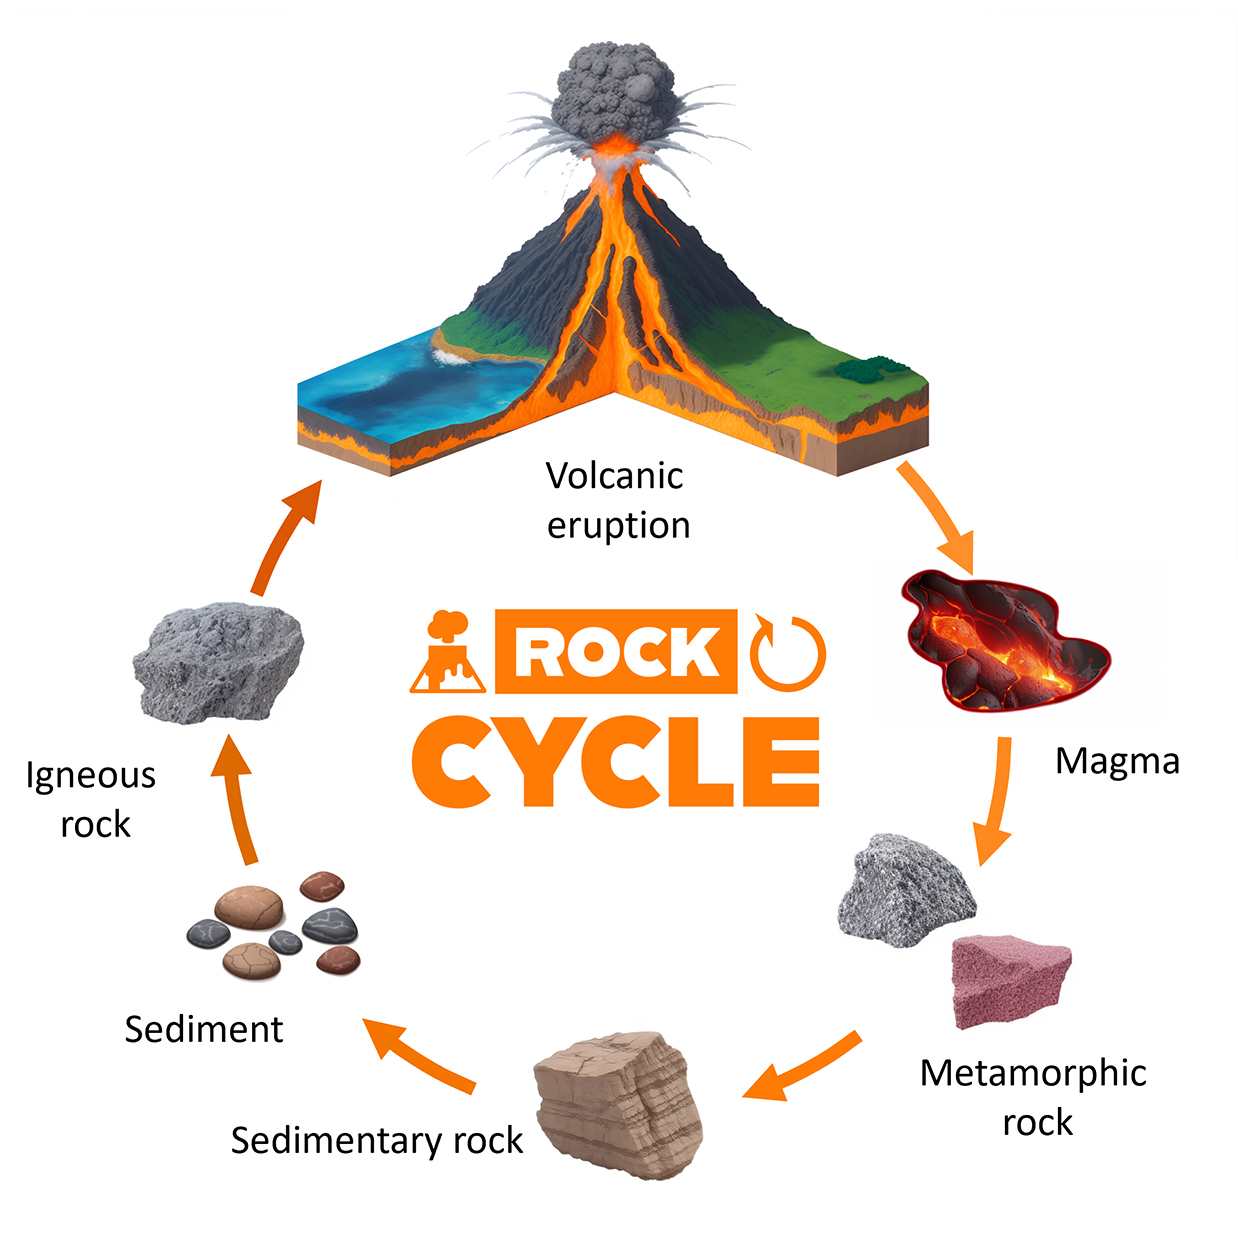 This image is a diagram illustrating the rock cycle. It shows various stages of the cycle, including the formation and transformation of different types of rocks due to natural processes like volcanic eruptions. The diagram is labeled “ROCK CYCLE,” and has an icon of a volcano erupting at the top. The cycle starts from magma, which cools down to form igneous rock. Igneous rock breaks down into sediment, which compresses into sedimentary rock. Sedimentary rock under heat and pressure transforms into metamorphic rock, which melts during volcanic eruptions, turning back into magma. The diagram uses arrows to indicate the flow of the cycle from one type of rock or material to another.